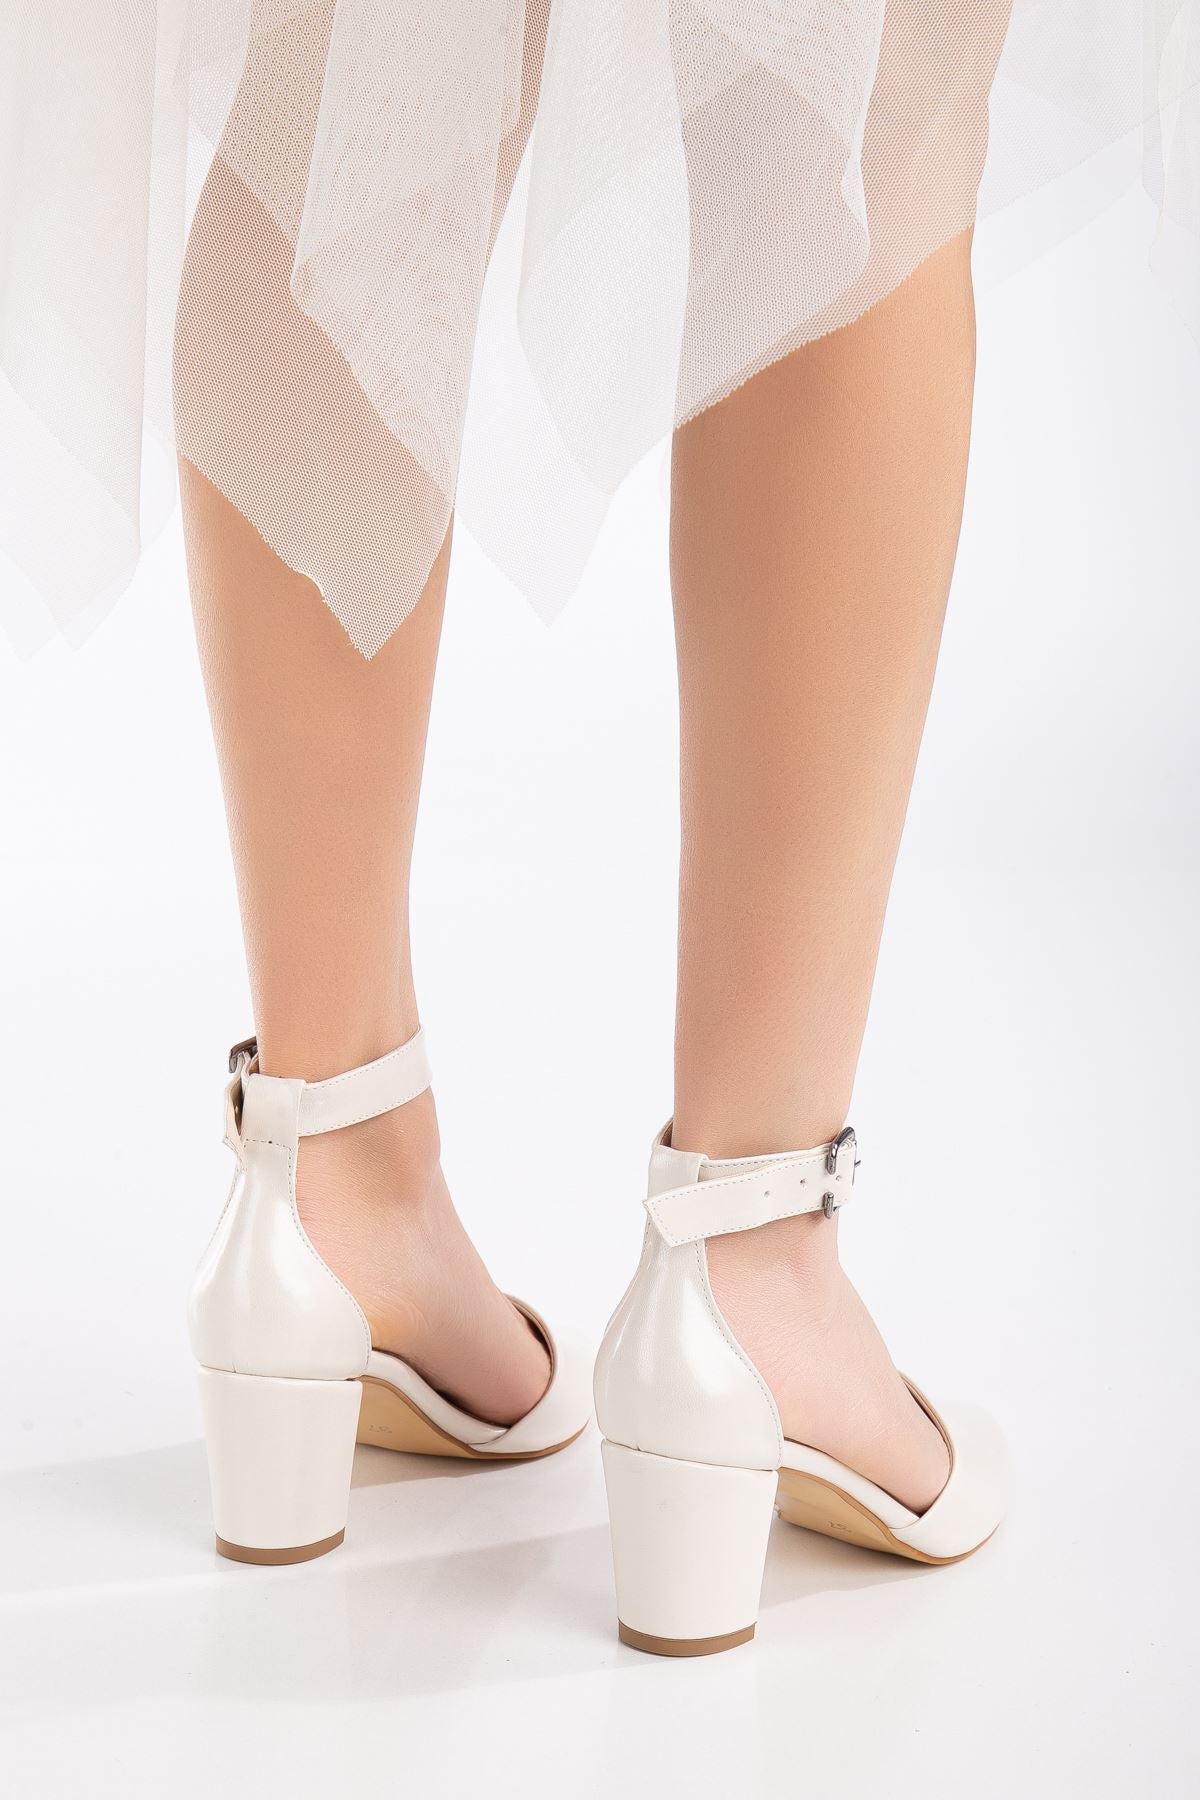 Lottis White Mother of Pearl Skin Detailed Heeled Women's Shoes - STREETMODE™